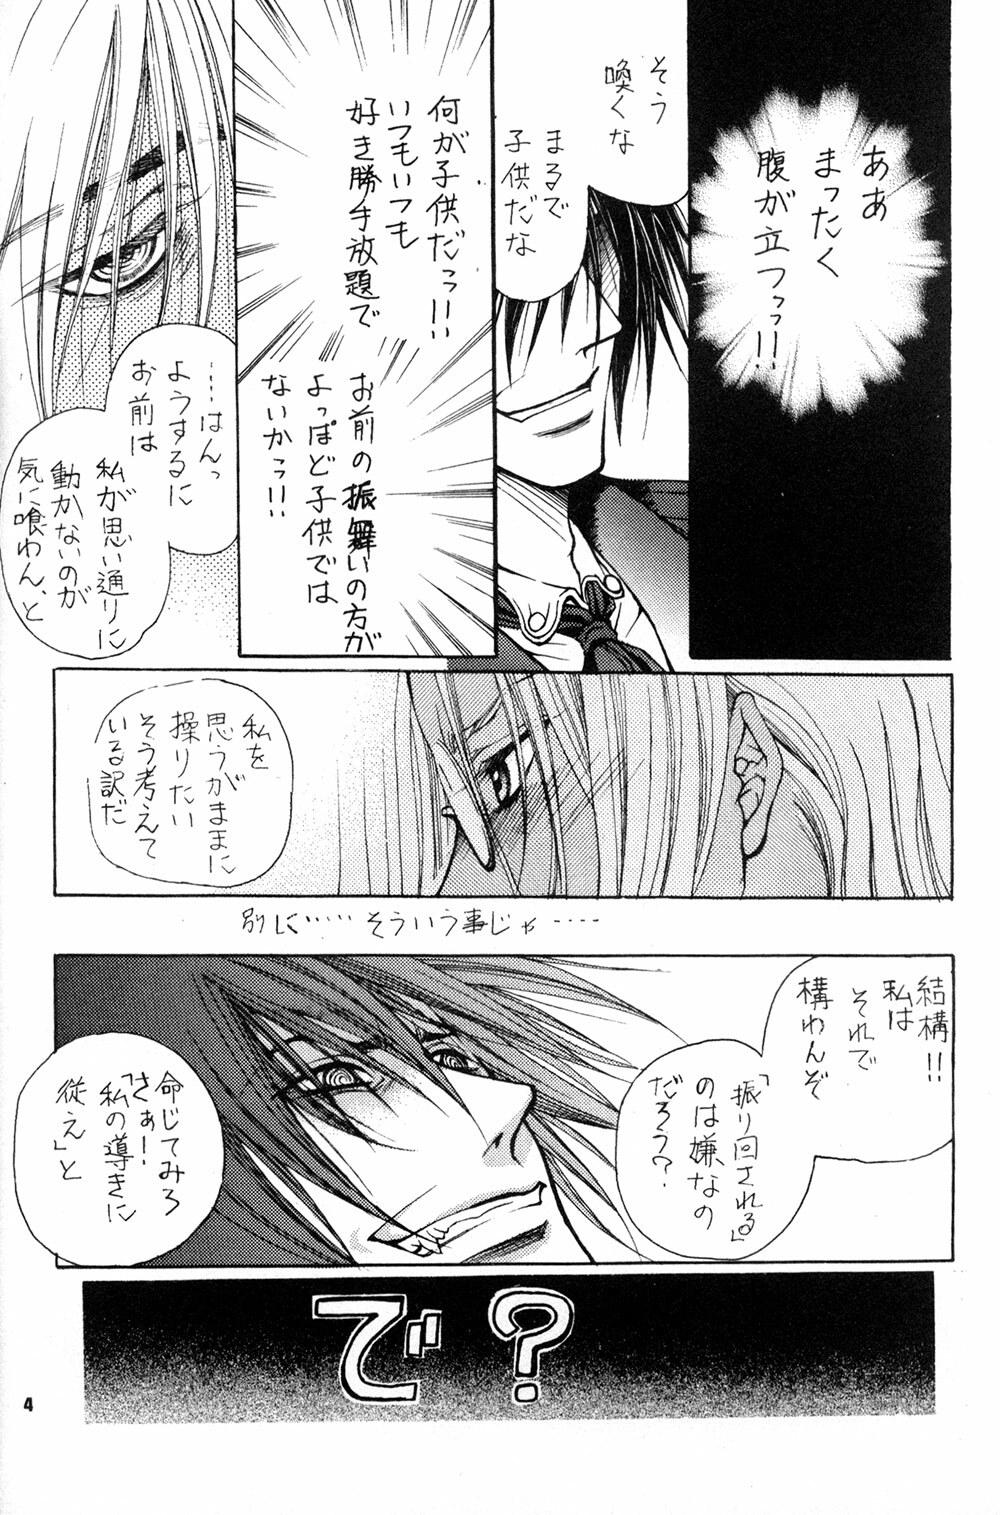 The Long Tunnel of Wanting You (Hellsing) page 4 full